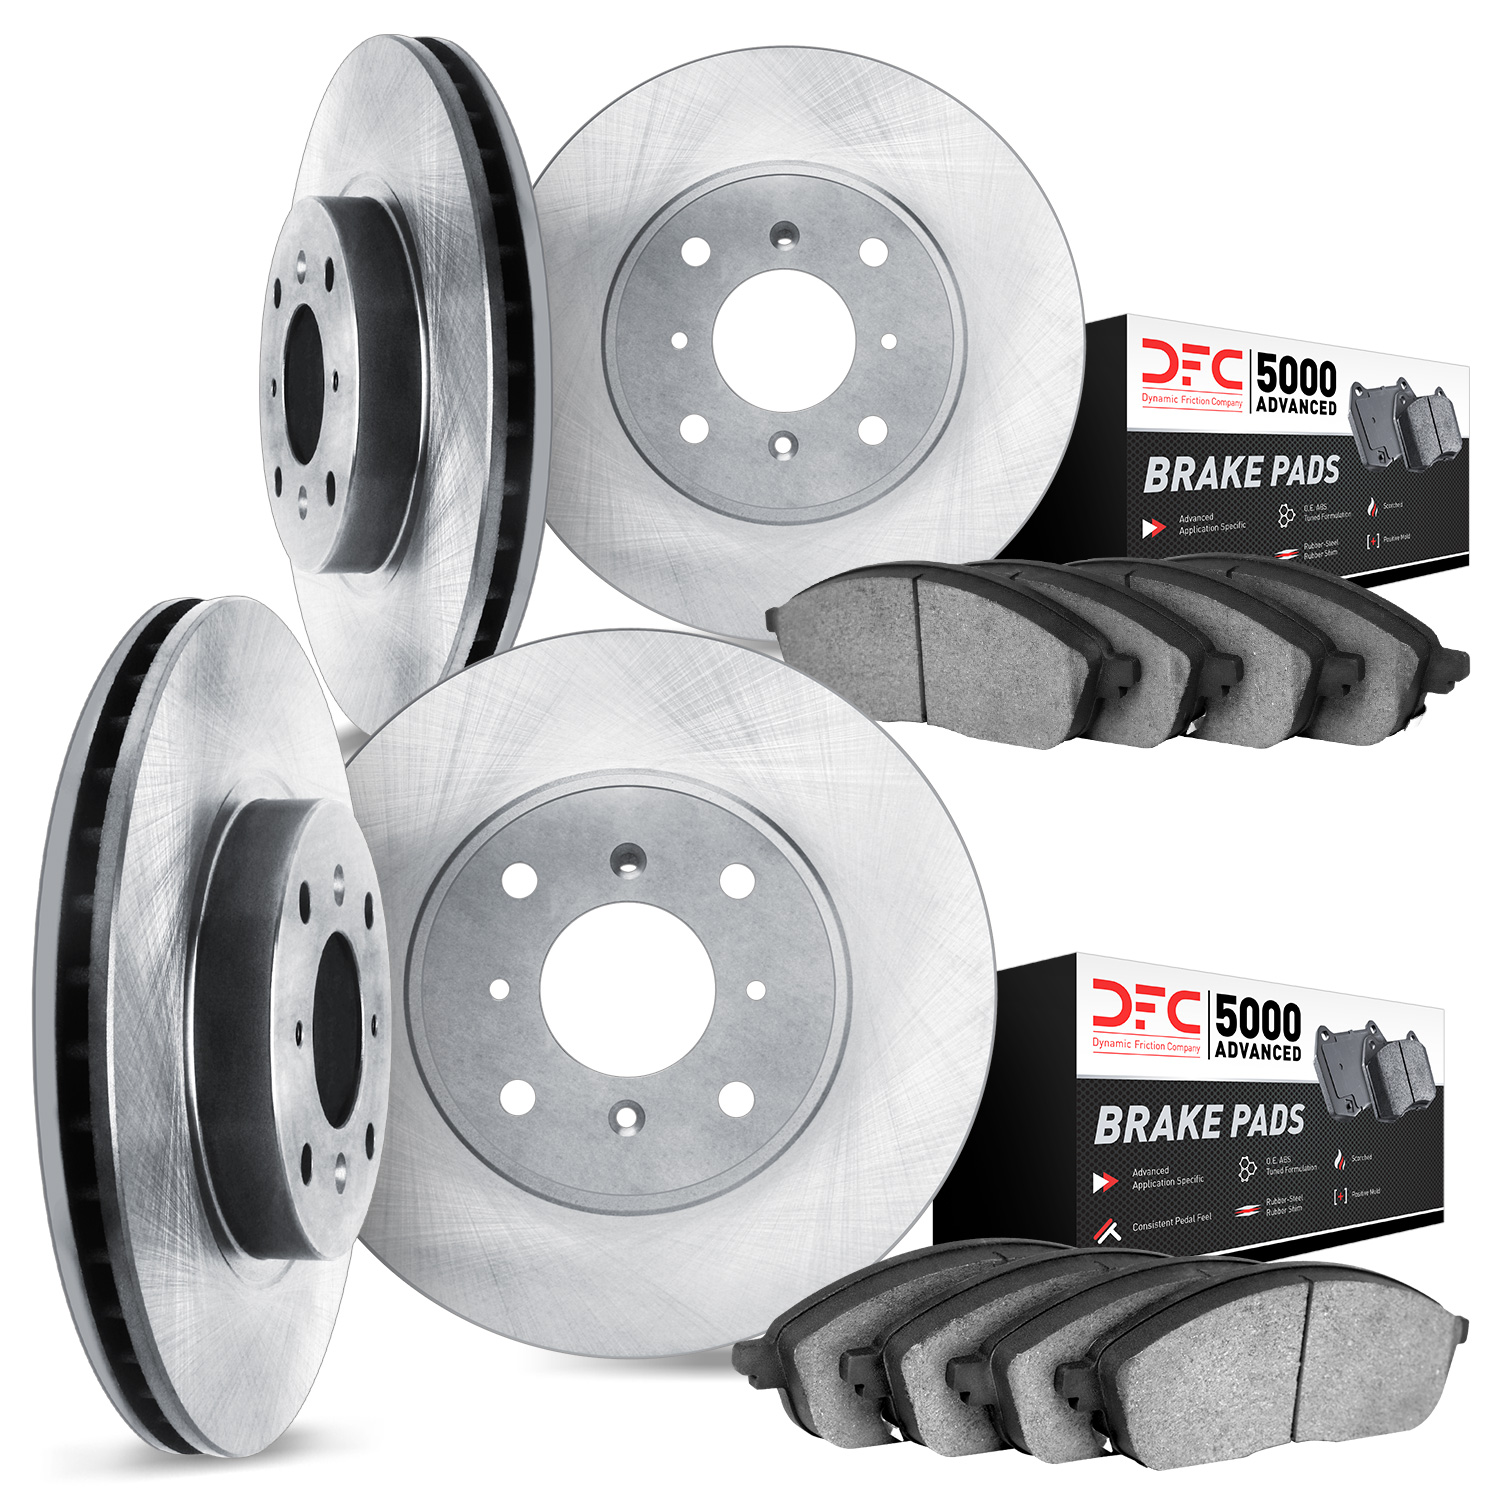 6504-56095 Brake Rotors w/5000 Advanced Brake Pads Kit, 1995-2000 Ford/Lincoln/Mercury/Mazda, Position: Front and Rear